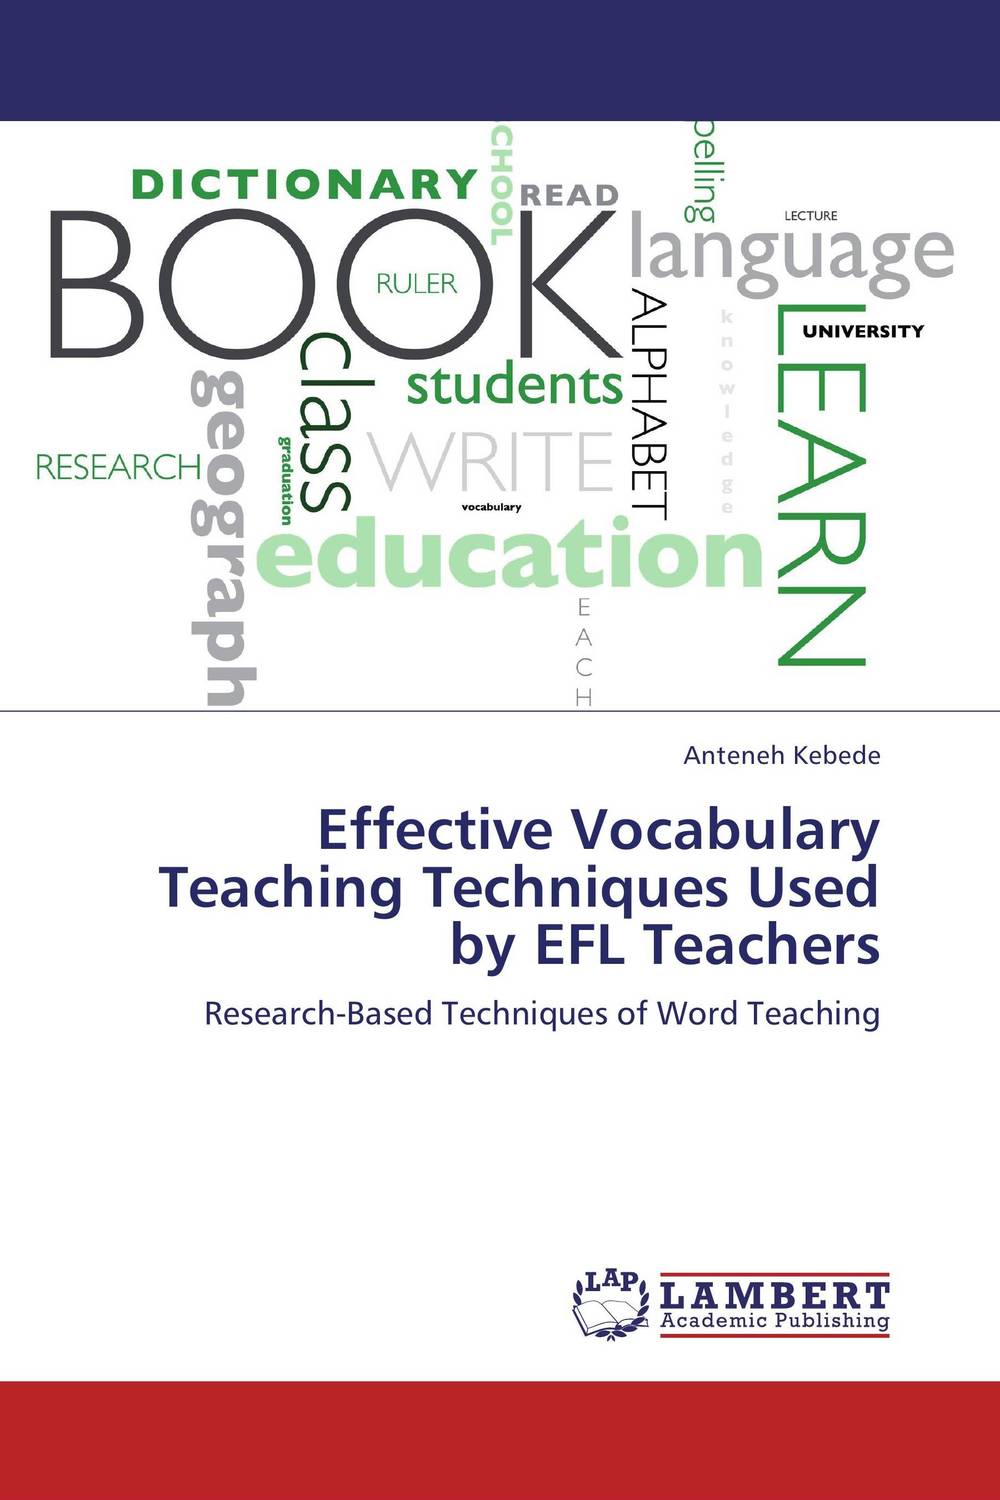 Effective Vocabulary Teaching Techniques Used by EFL Teachers: Research-Based Techniques of Word Teaching